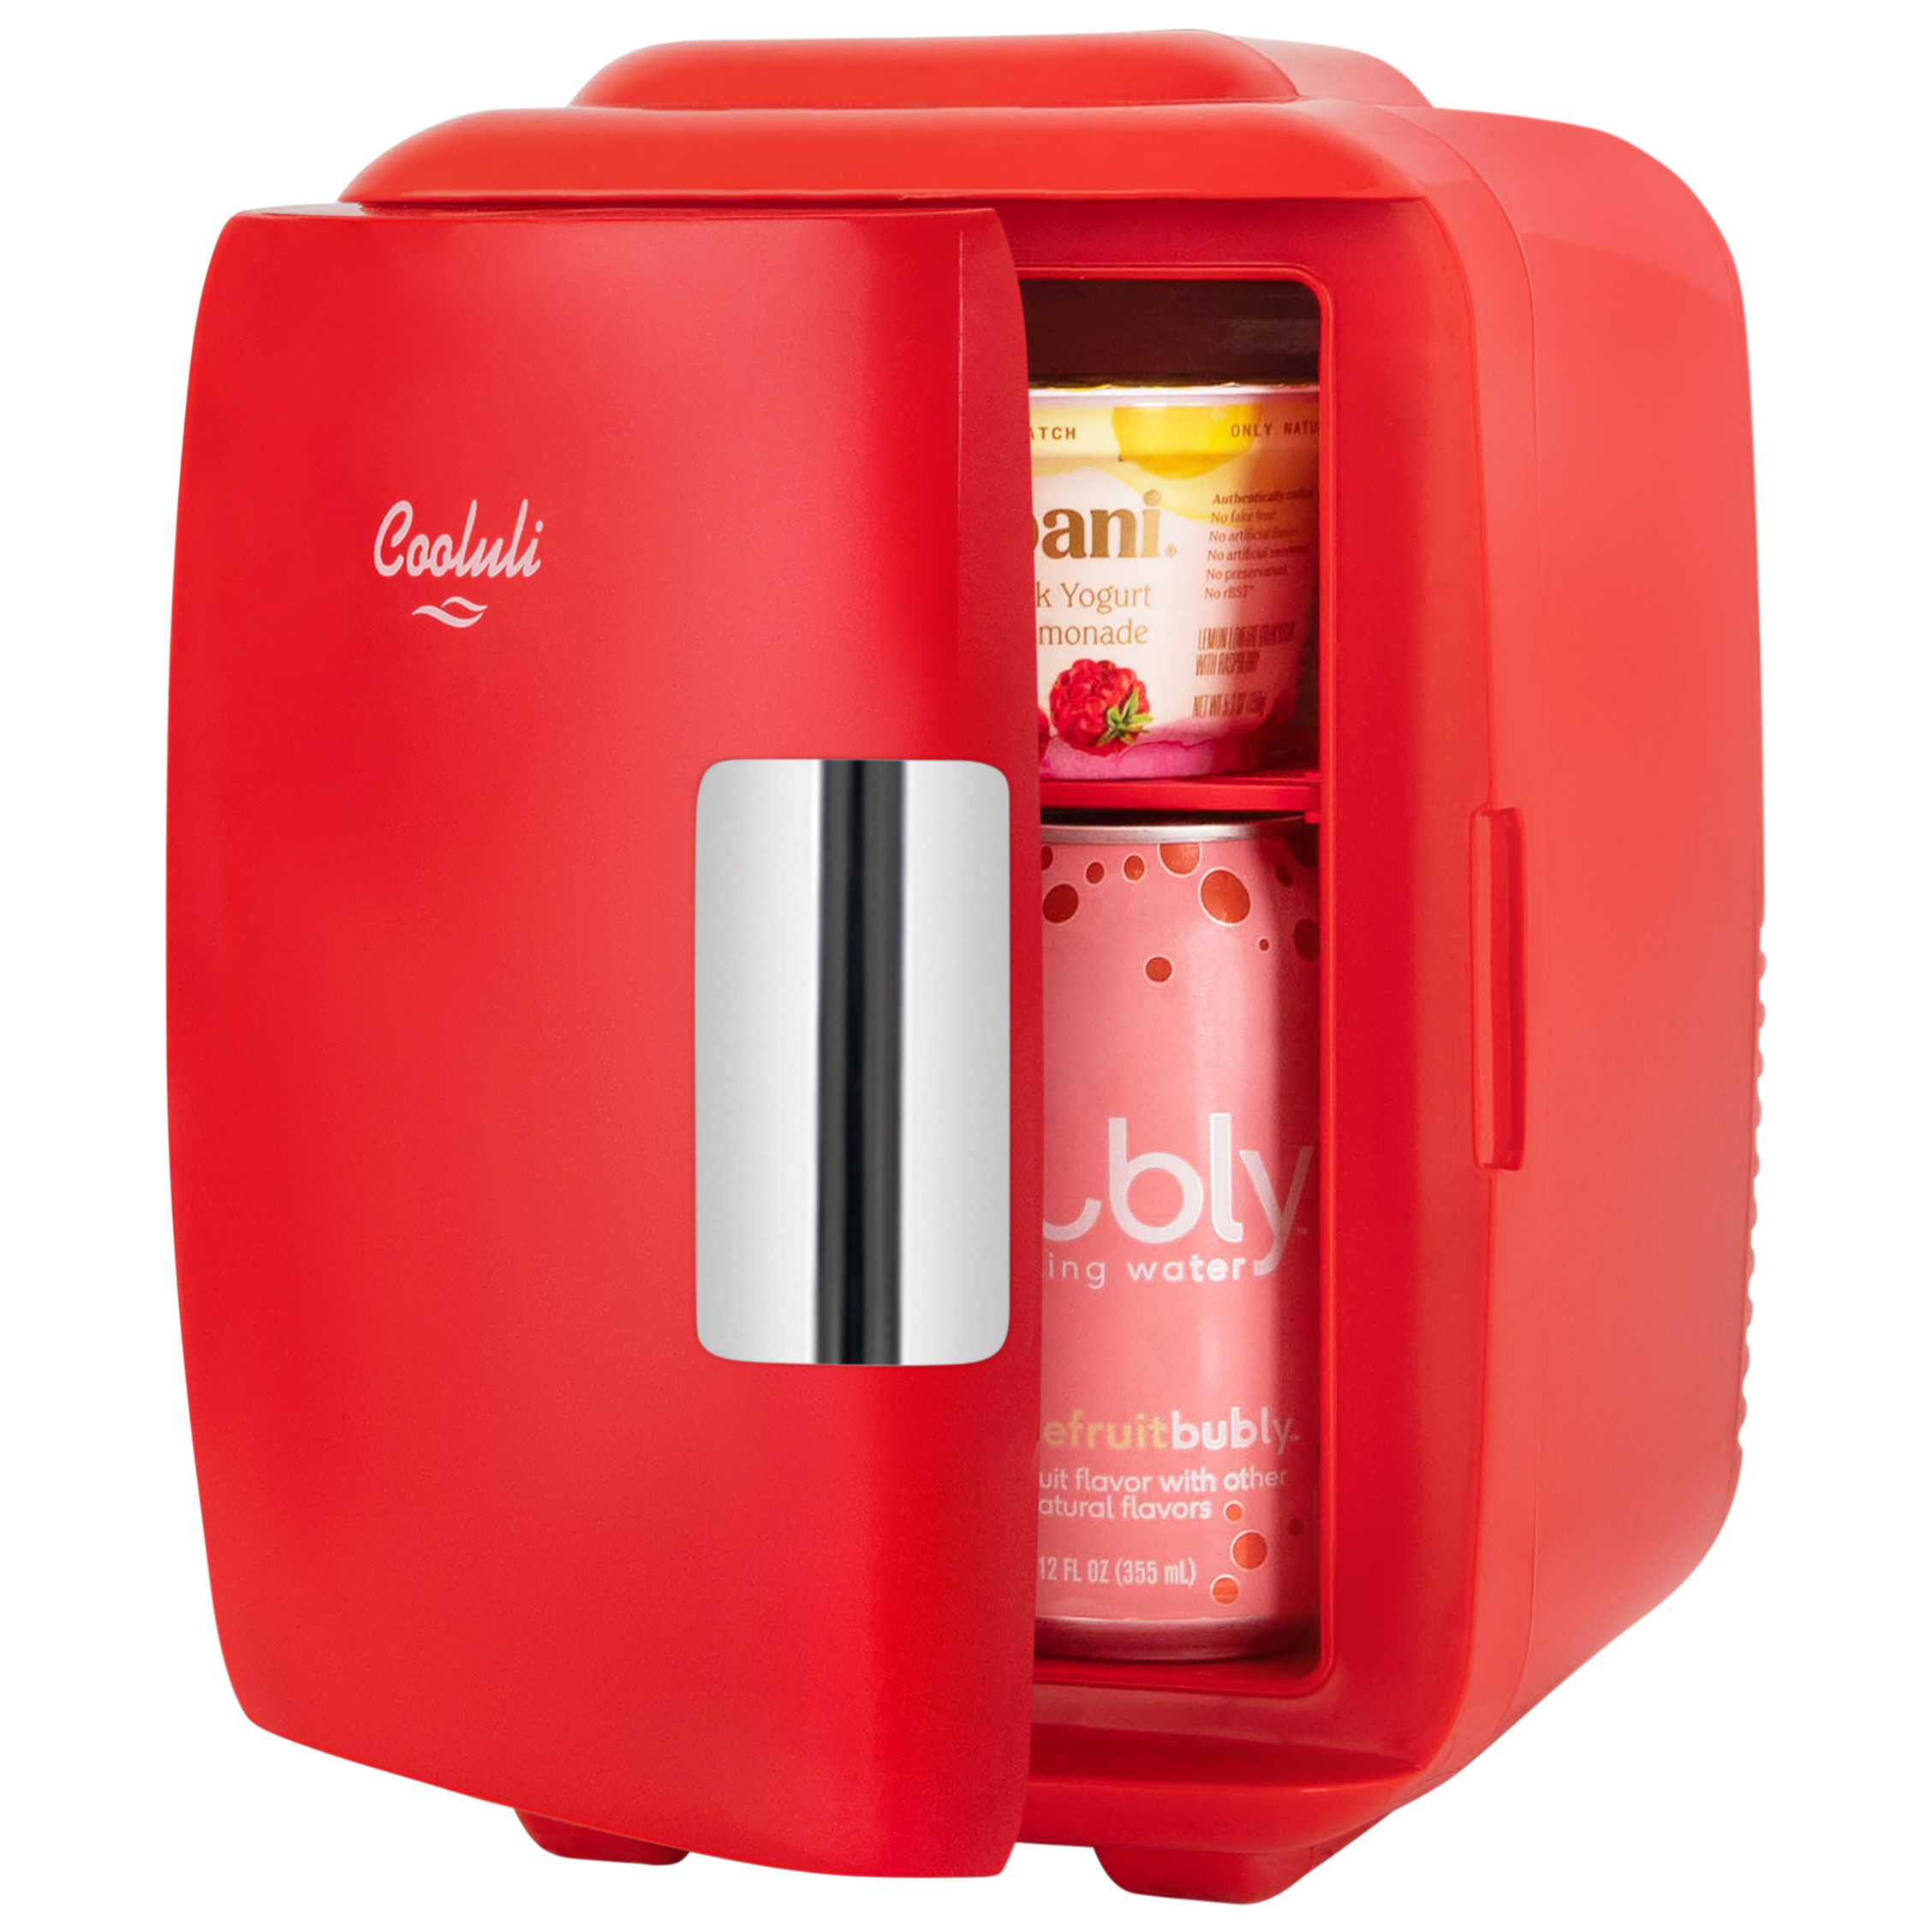  Cooluli Retro Coca-Cola Thermoelectric Mini Fridge for Bedroom,  Office, Dorm - 4L/6 Can Portable Cooler & Warmer for Food, Drinks &  Skincare - AC/DC and USB Power Options (Red, Compact): Home